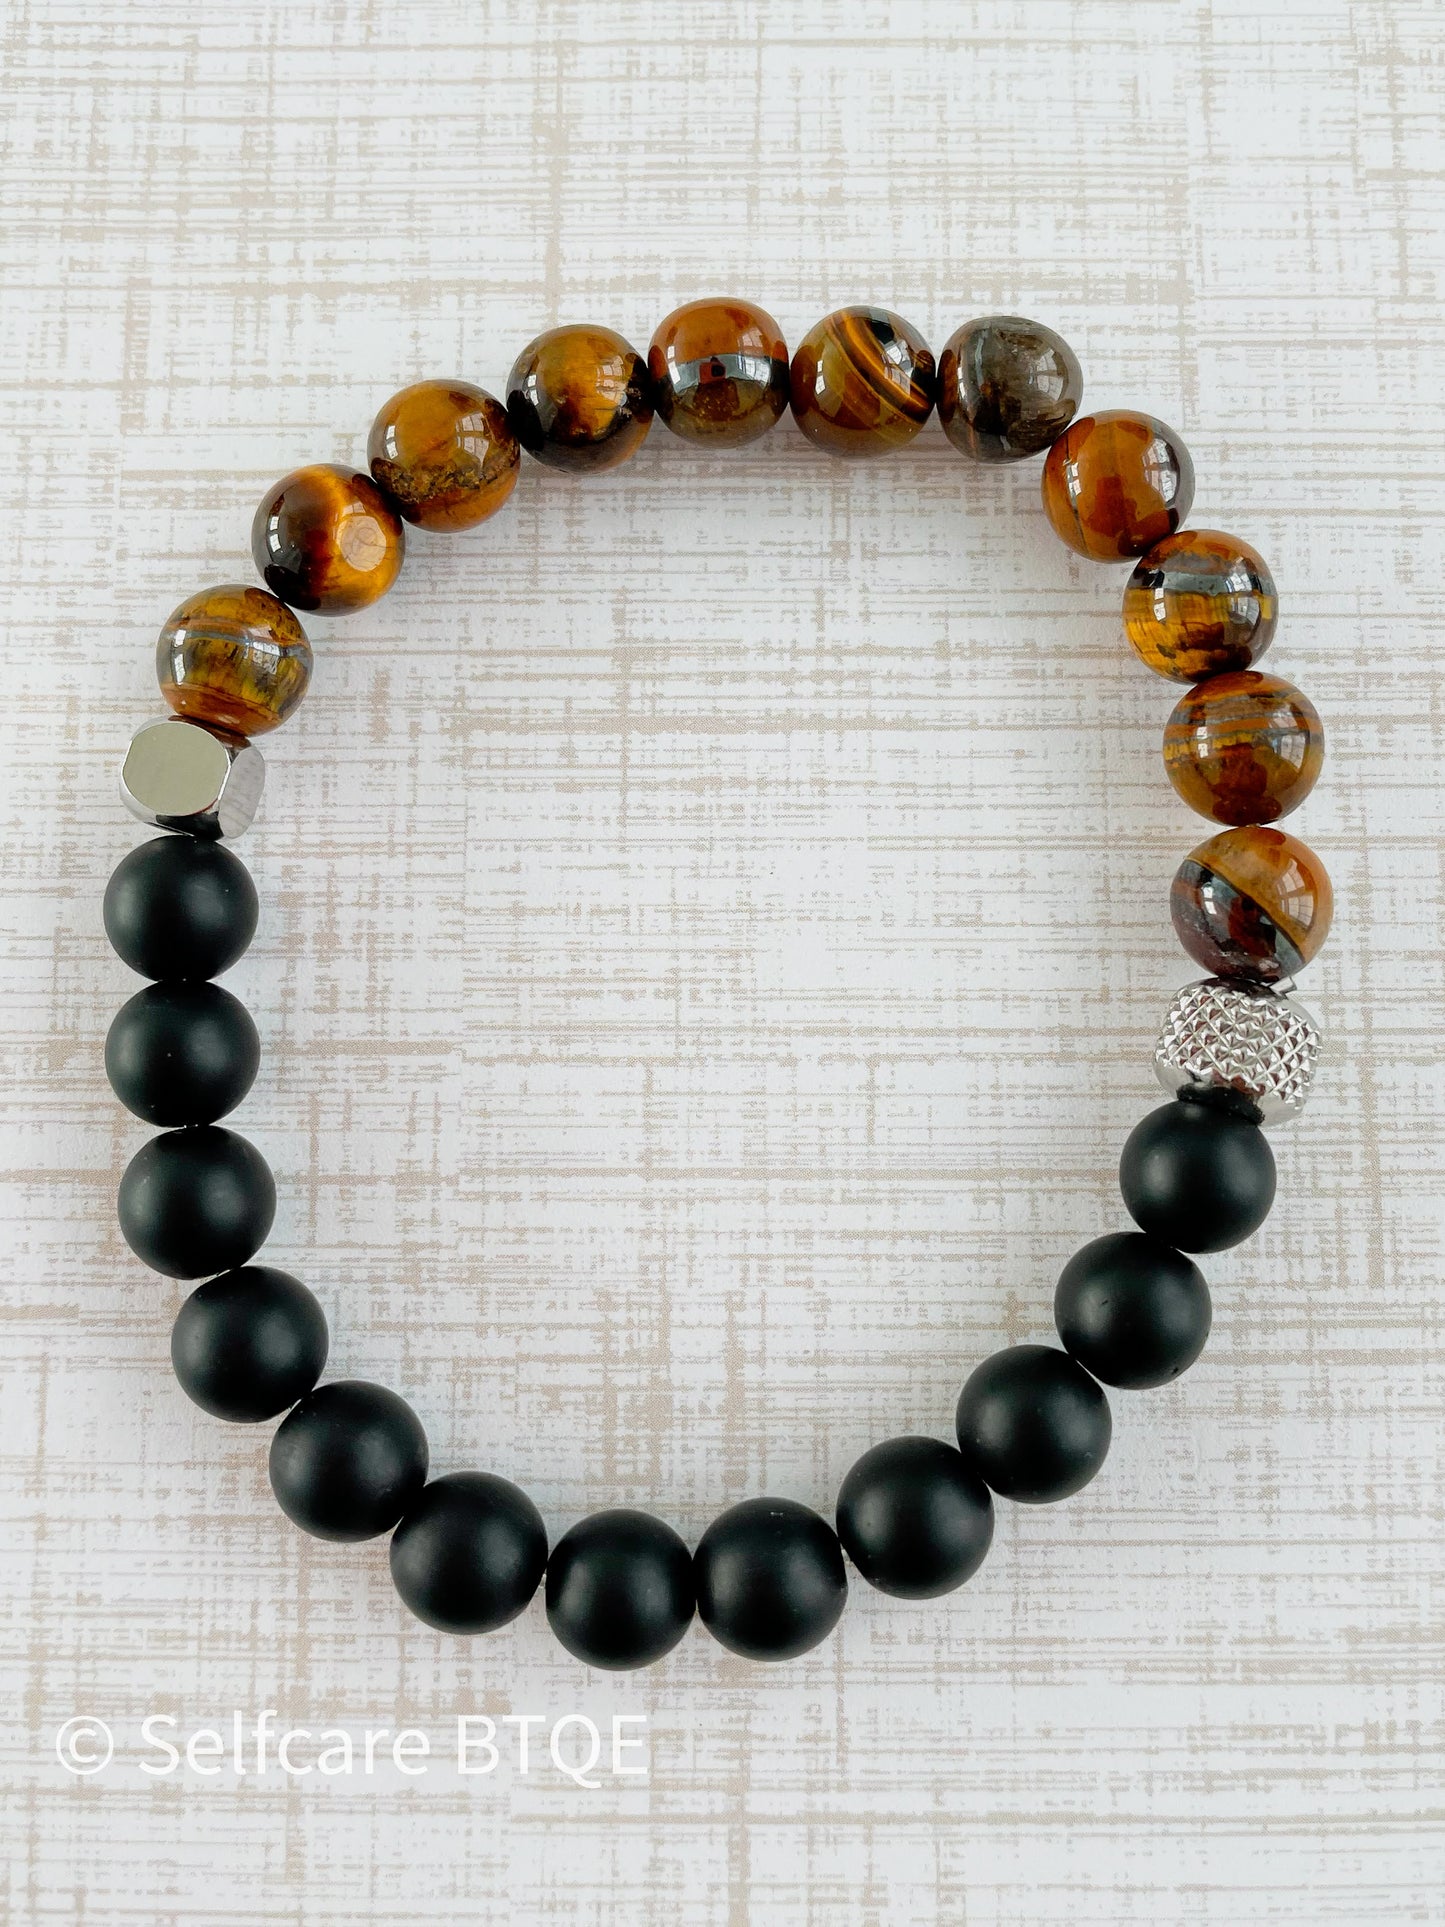 Tiger’s Eye and Frosted Black Agate Stone Bracelet |8mm